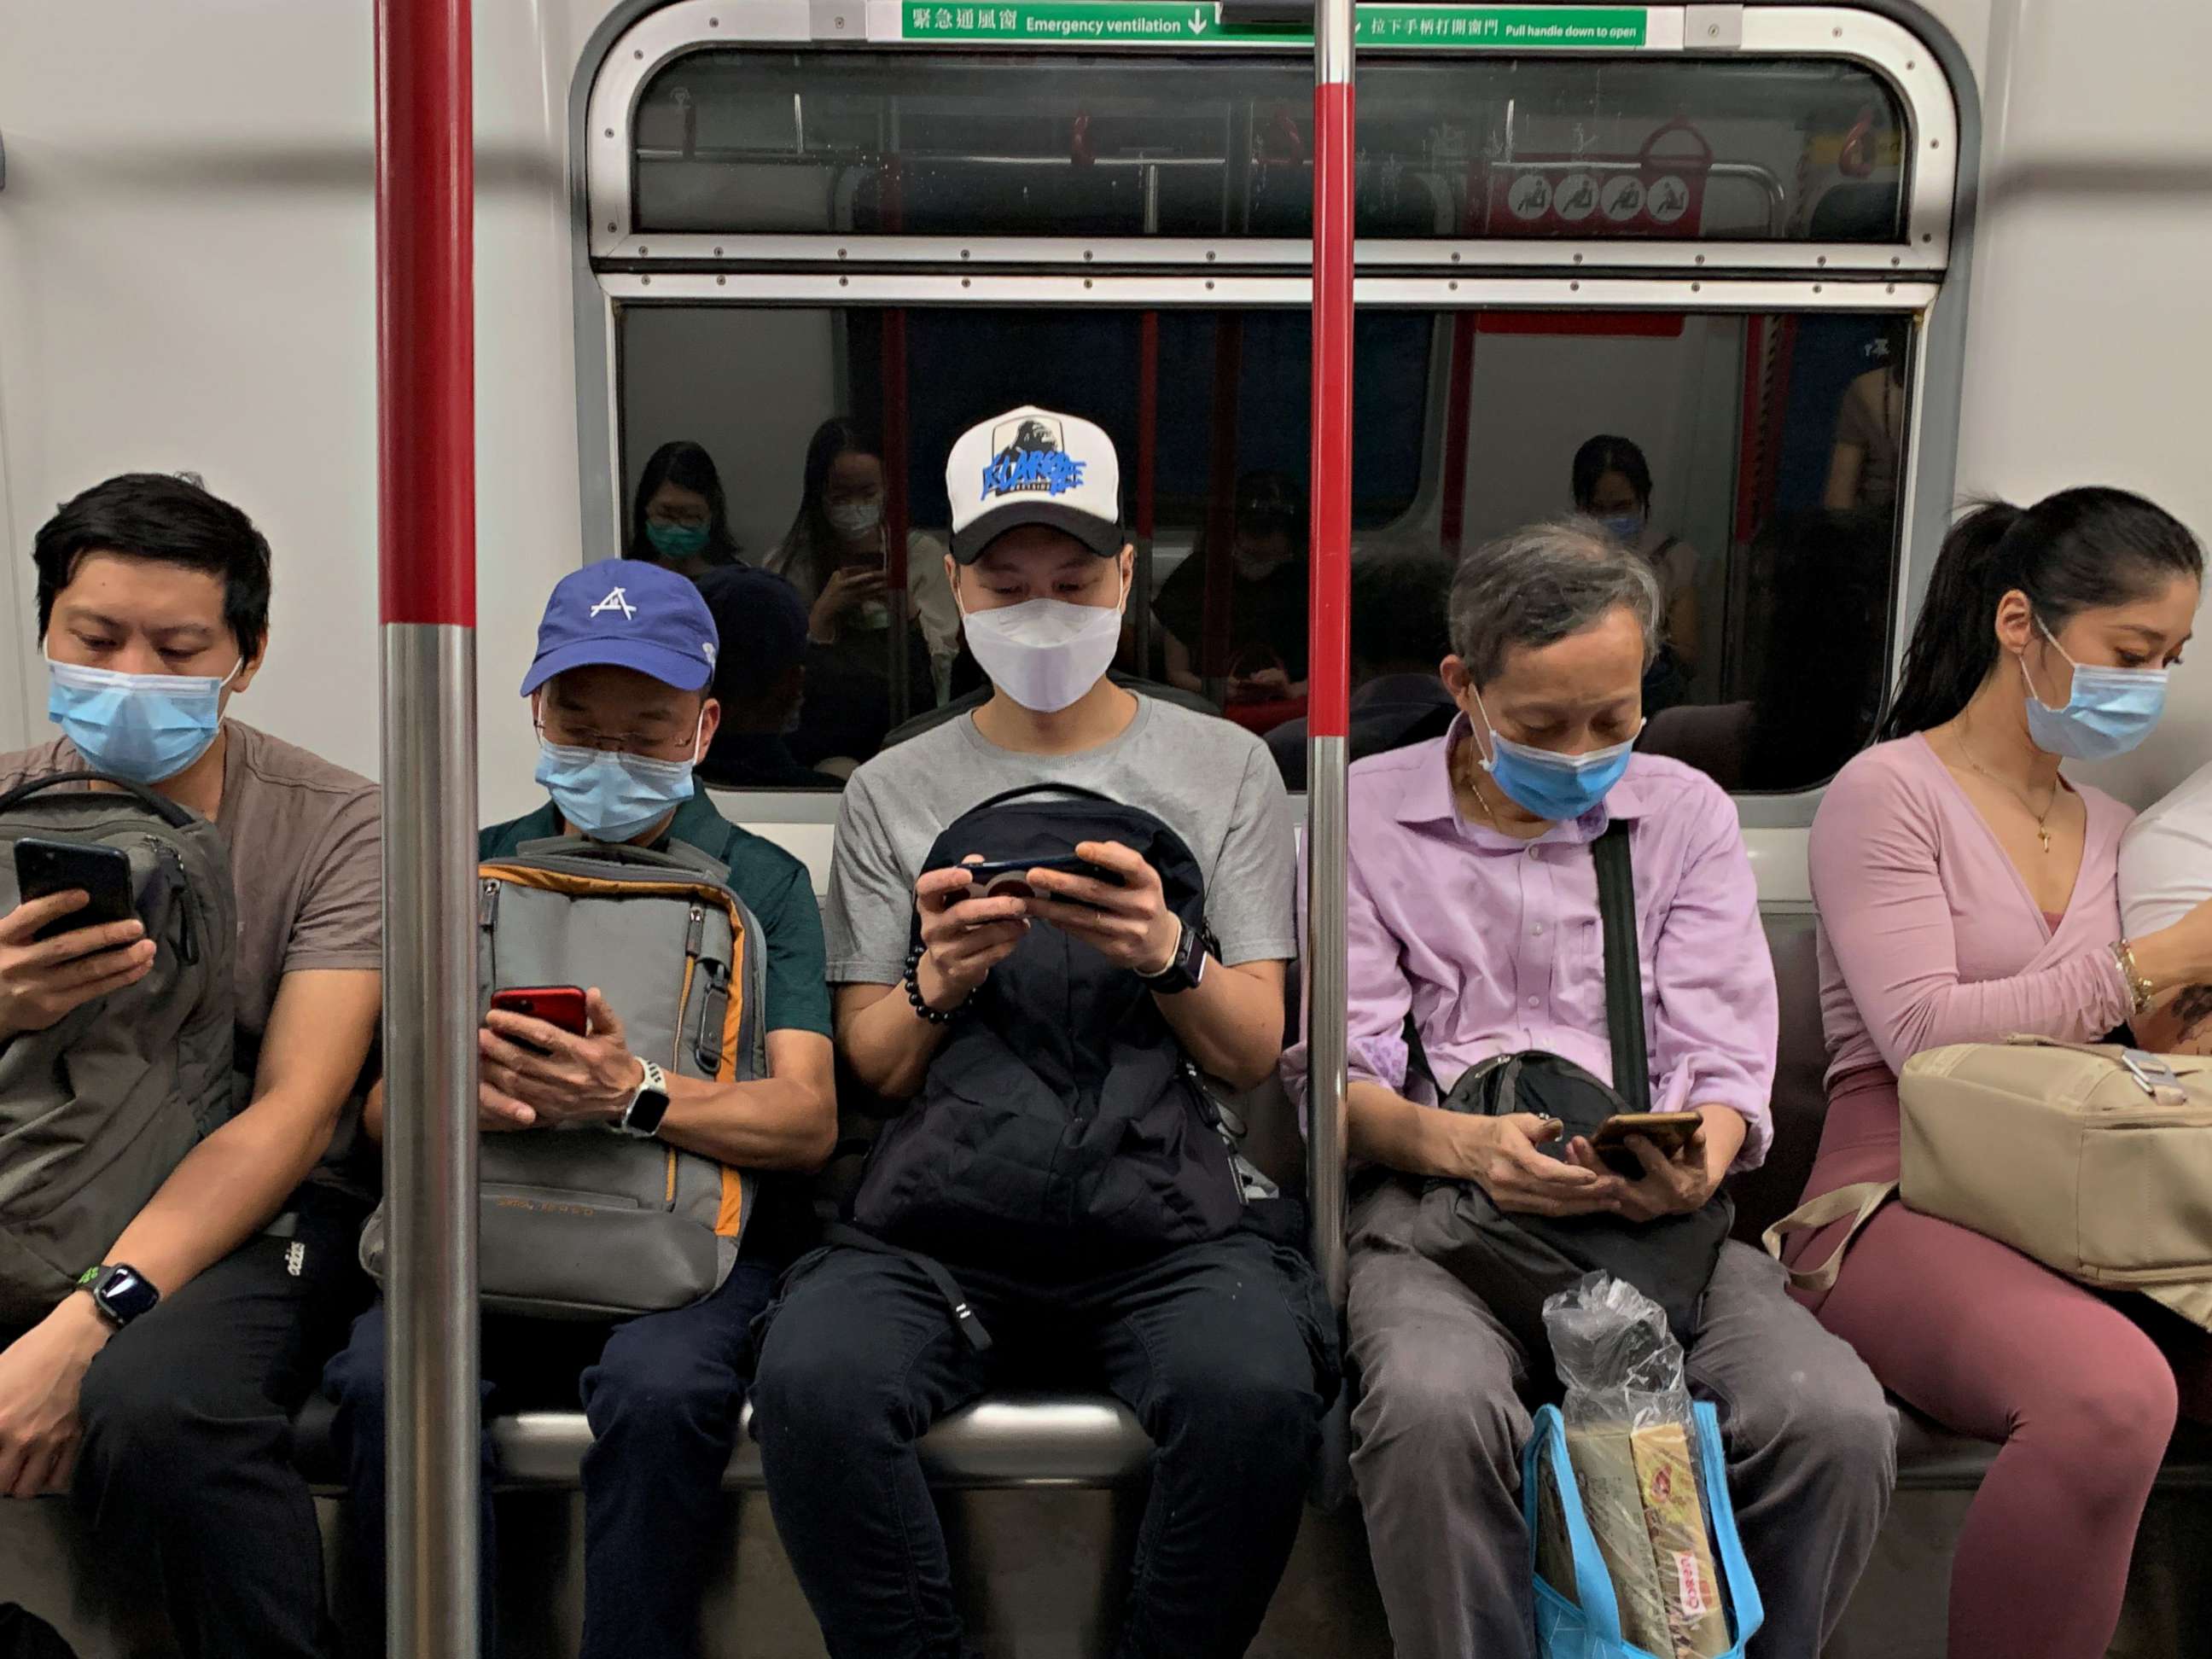 PHOTO: Passengers wear surgical masks in an MTR train in Hong Kong, July 13, 2020.